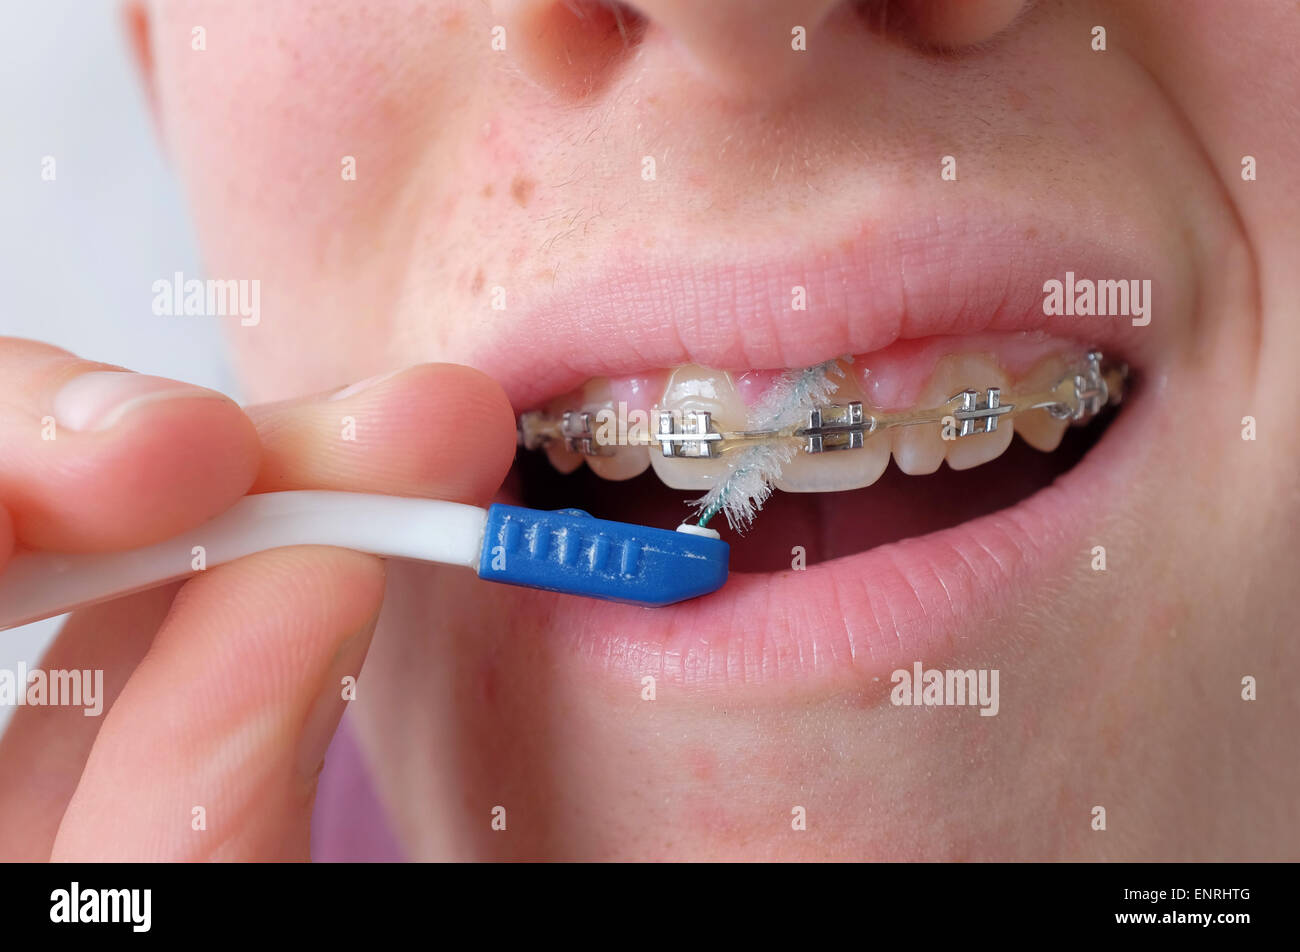 Teenage boy cleaning his teeth and braces with a brush close up Stock Photo